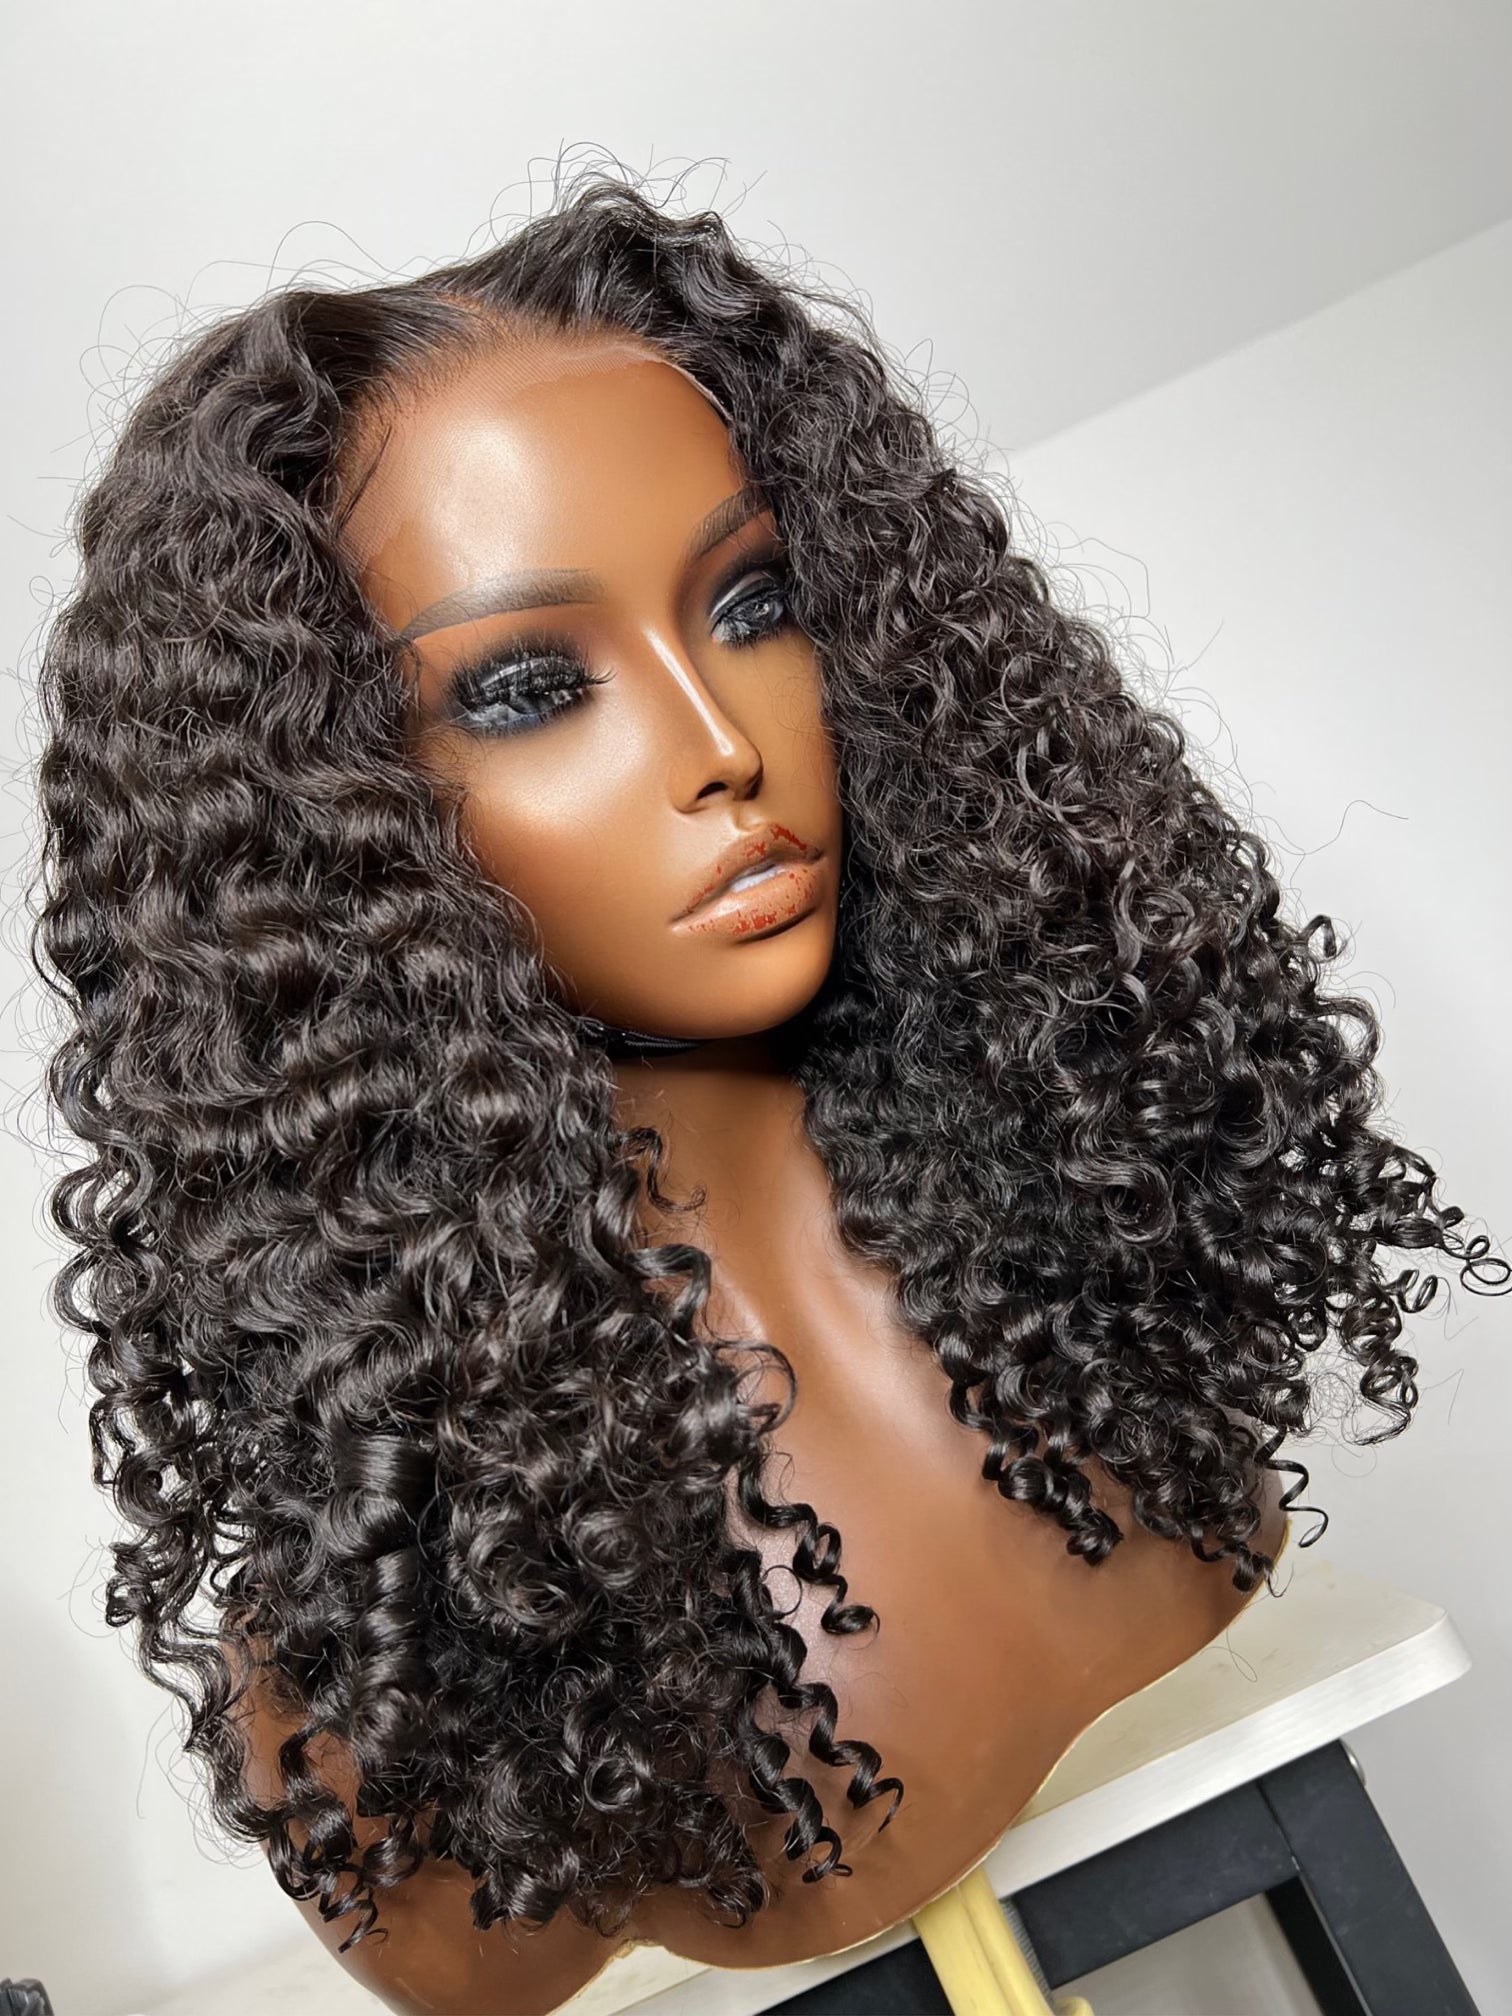 BURMESE CURLY UNIT (PRE-ORDER) 15-21 BUSINESS DAYS